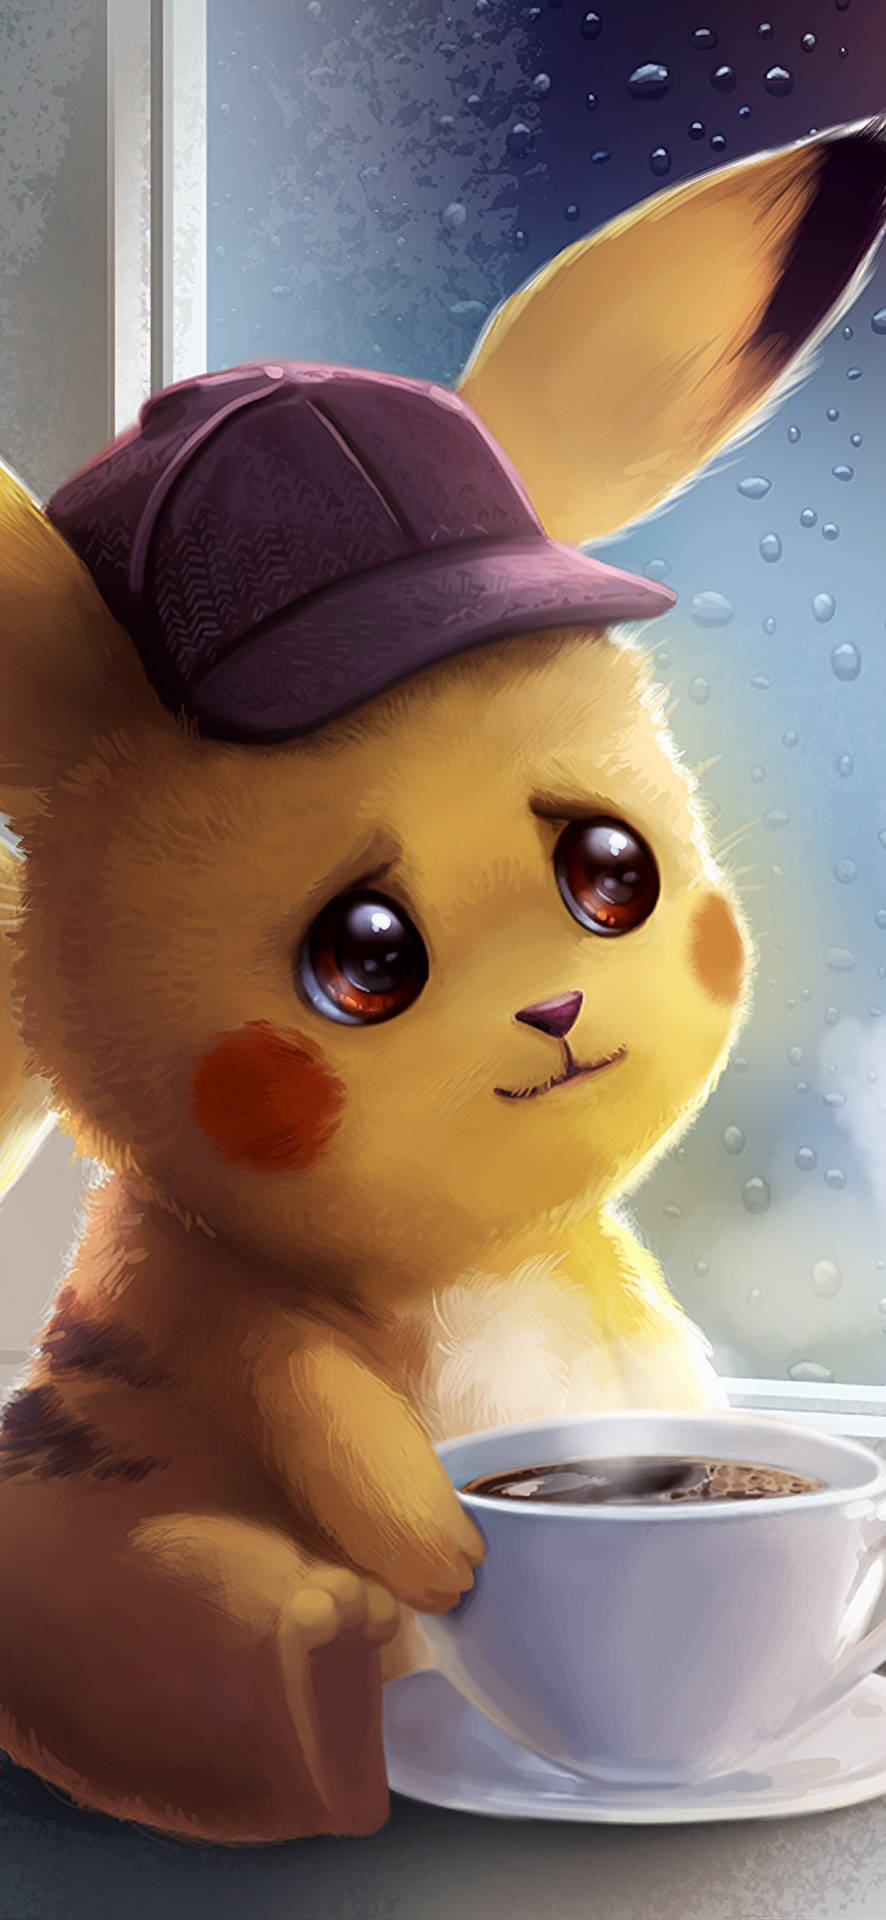 Download Pikachu With Cup Of Coffee Wallpaper | Wallpapers.com